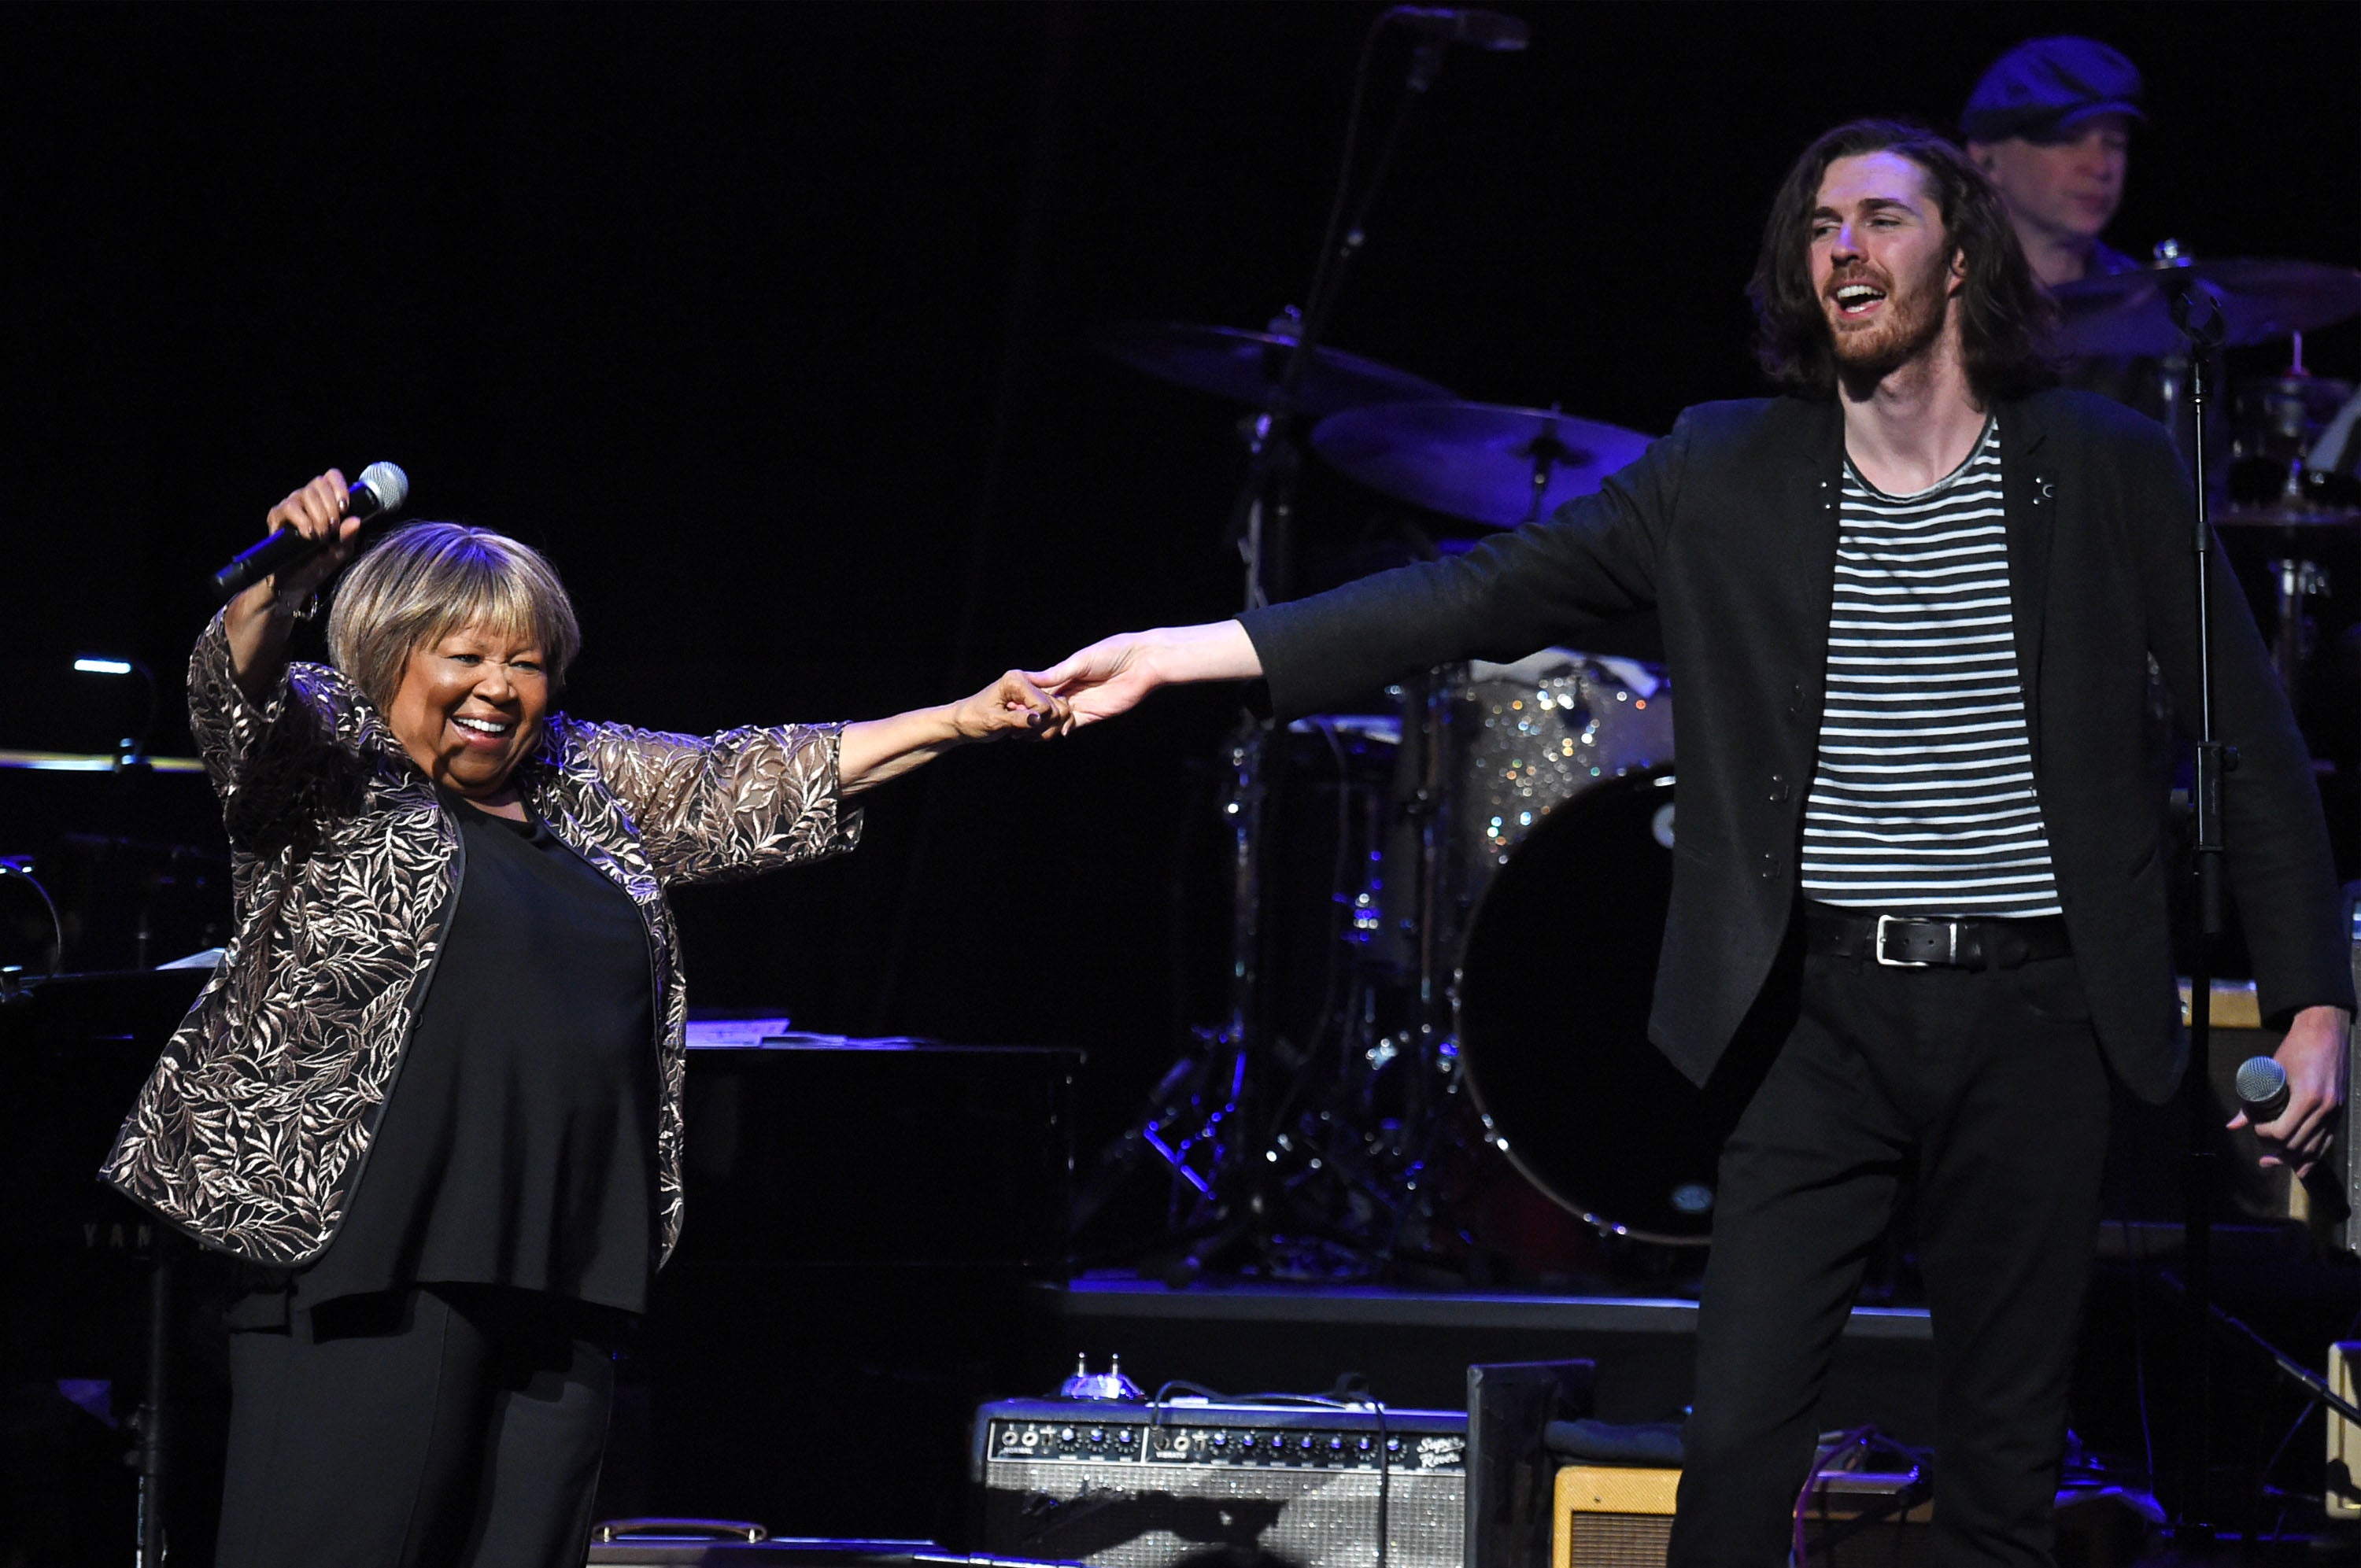 Hozier performing with Mavis Staples at the Third Annual Love Rocks NYC Benefit Concert, 2019